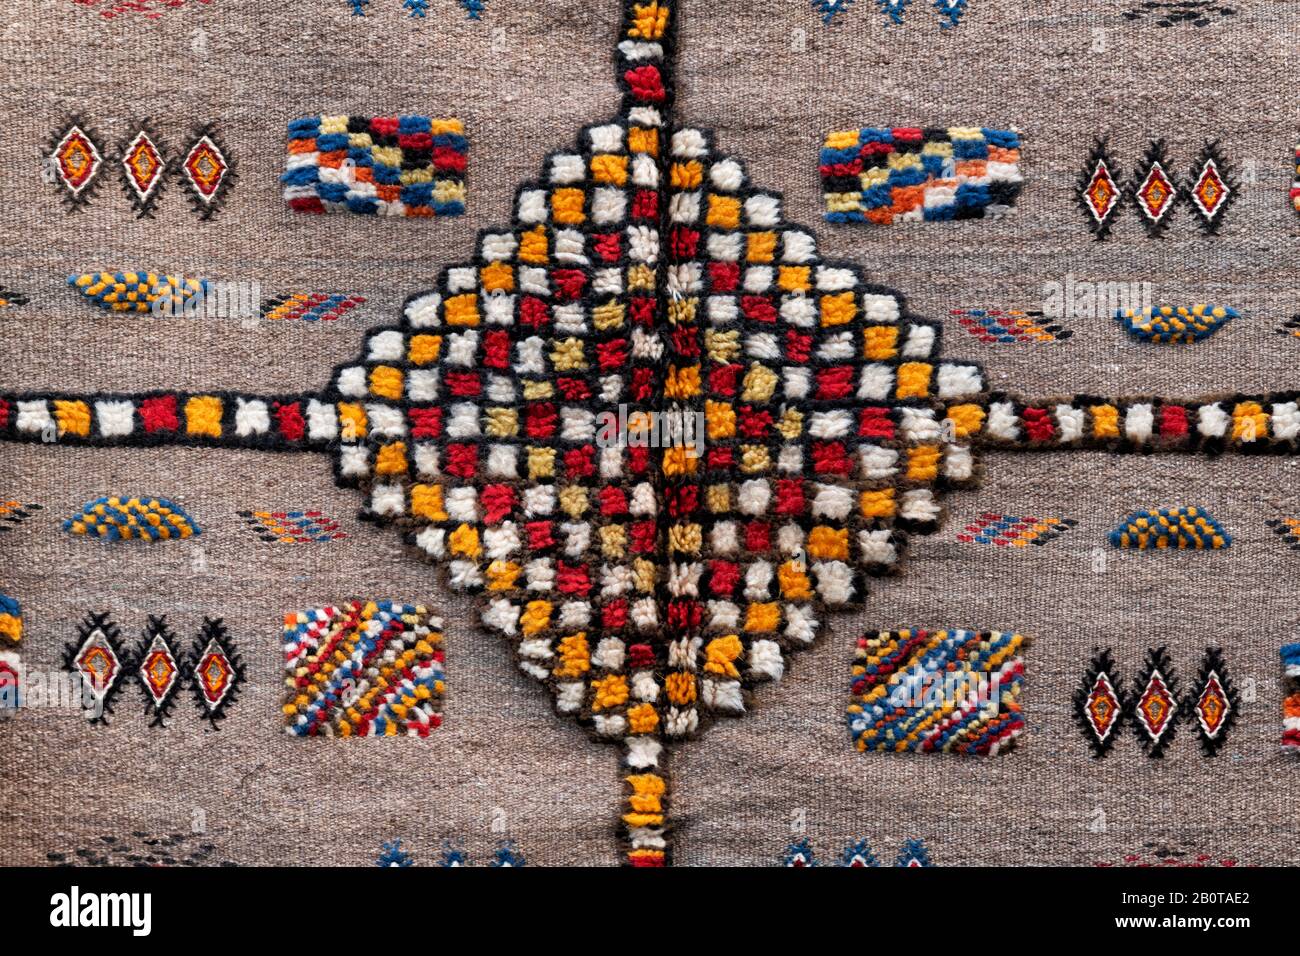 Moroccan carpet with traditional Berber design. Moroccan, Berber design background image. Stock Photo